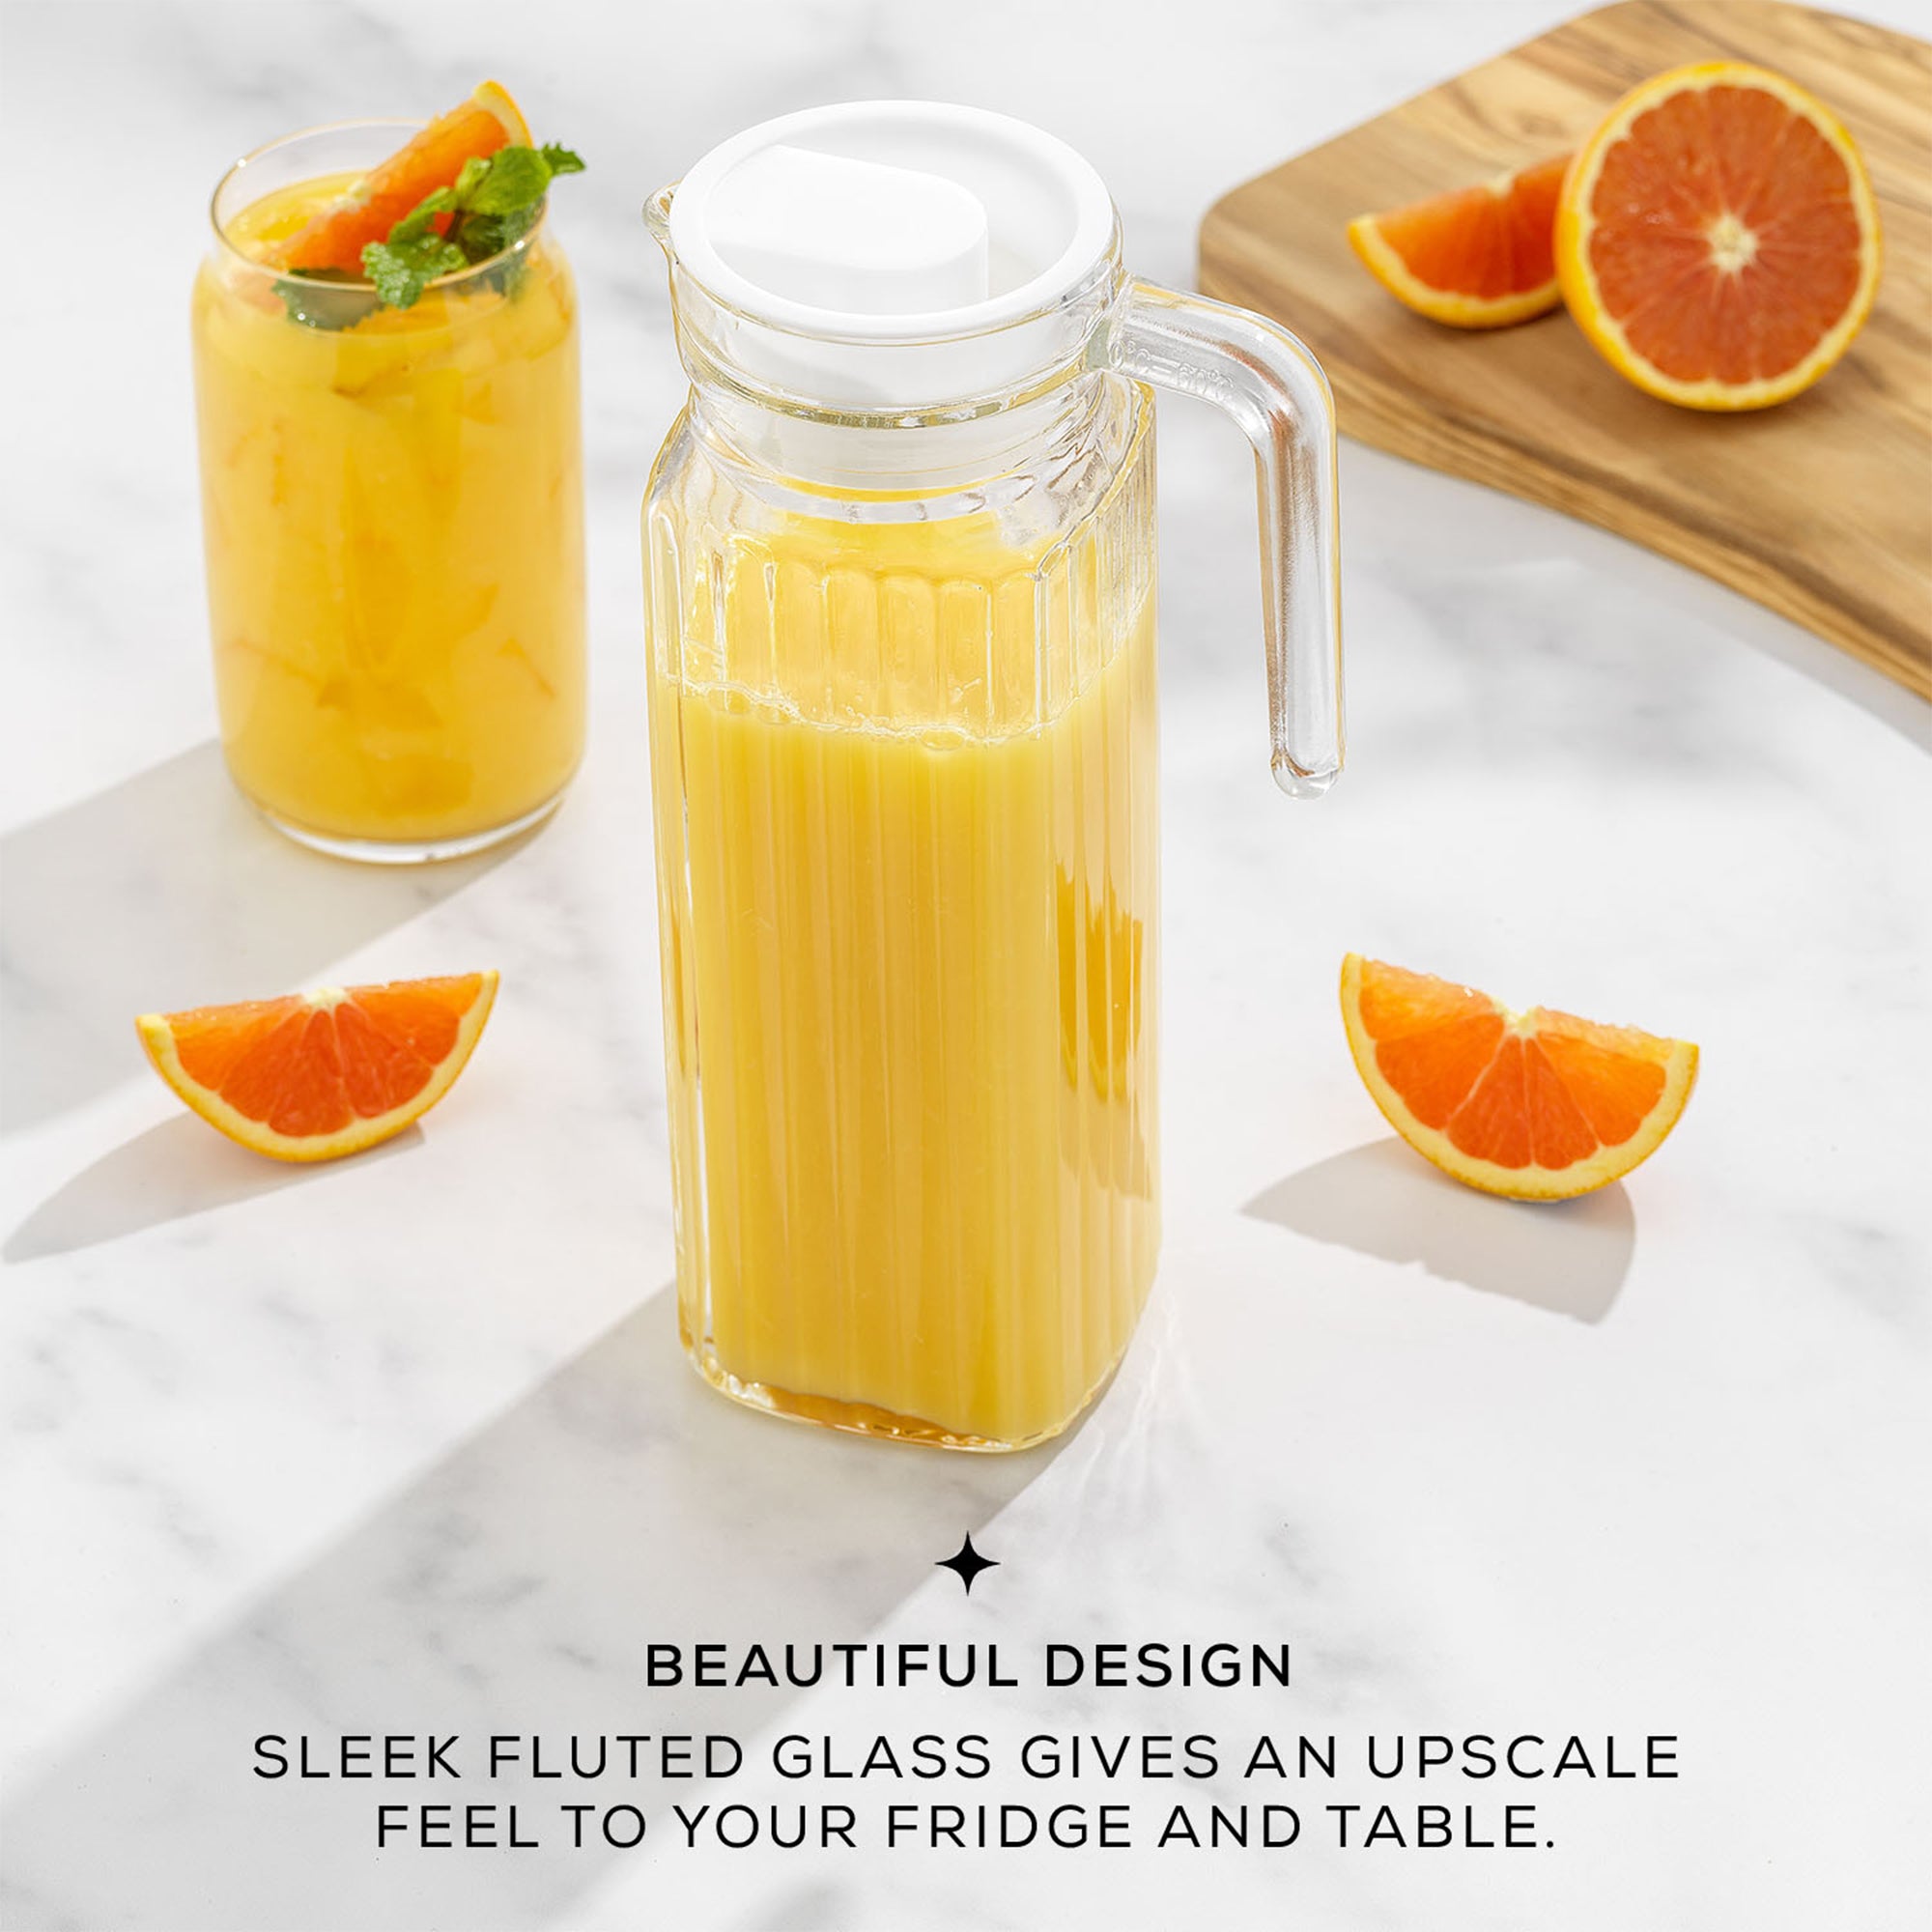 A large, clear glass pitcher filled with orange juice sits on a table next to a pile of oranges. The pitcher has a sleek, fluted design and a lid. Text on the image reads “BEAUTIFUL DESIGN. SLEEK FLUTED GLASS GIVES AN UPSCALE FEEL TO YOUR FRIDGE AND TABLE”.